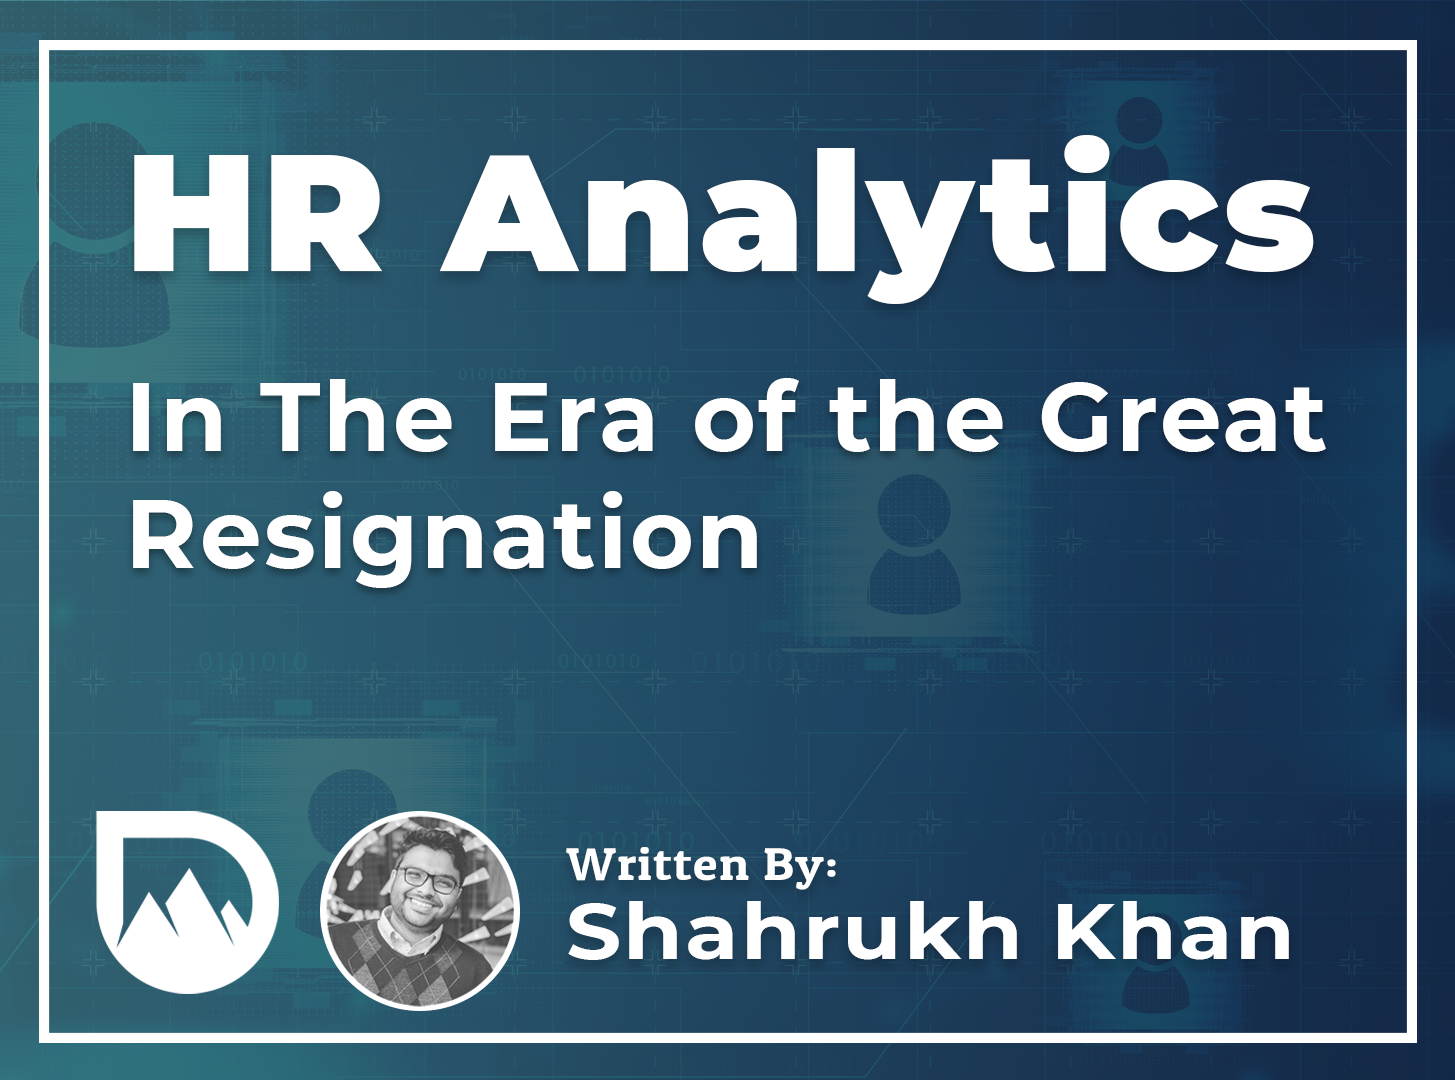 HR Analytics in the Era of the Great Resignation